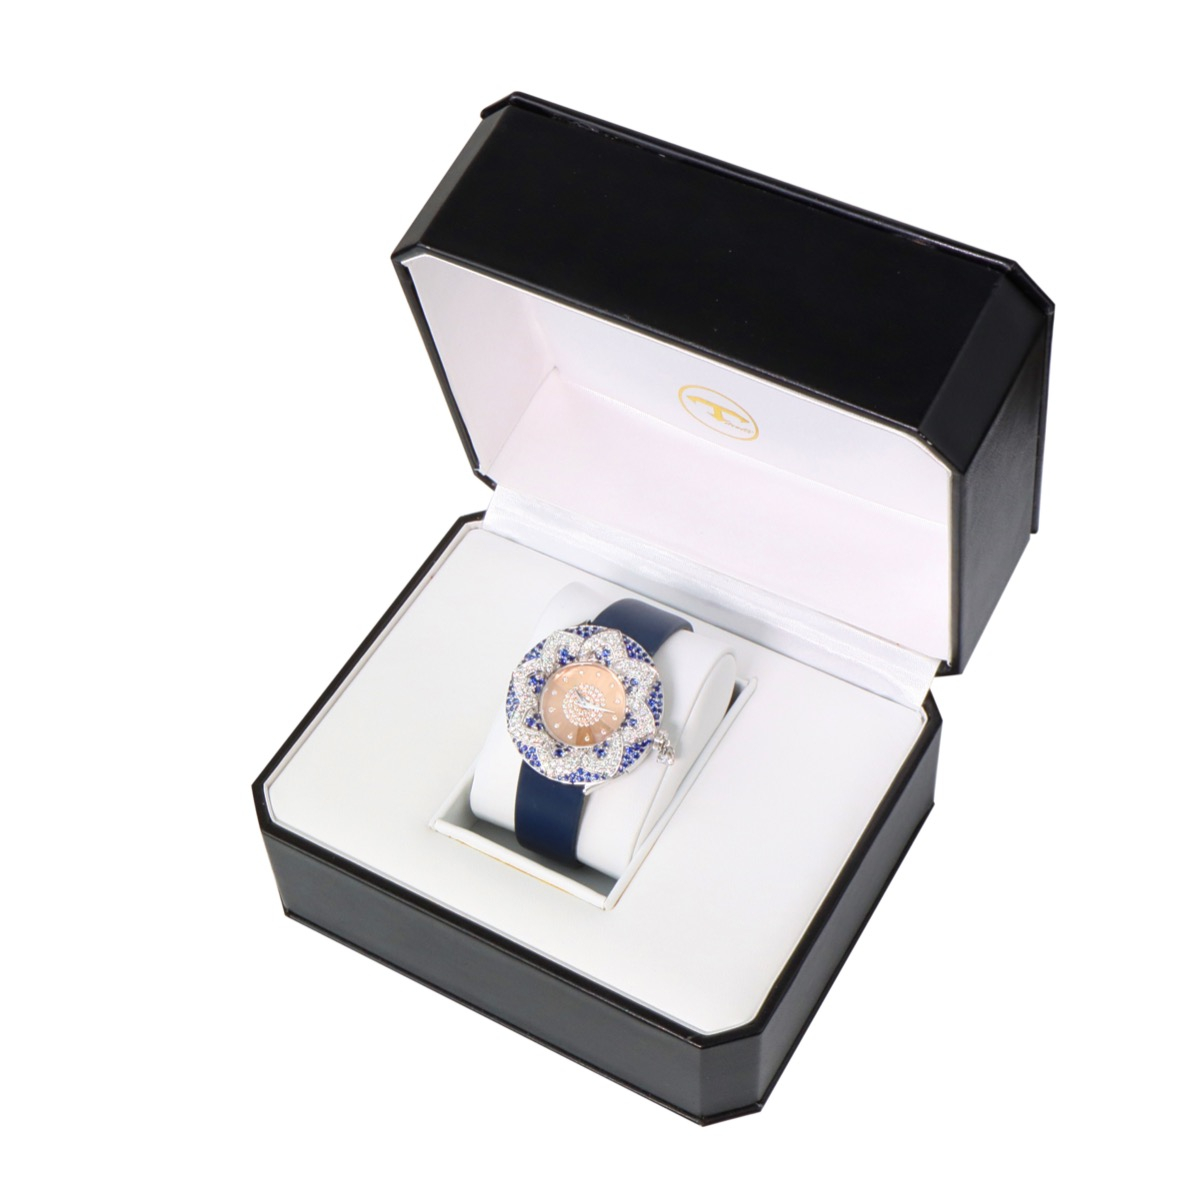 18K White and Rose Gold Jewelry Watch with Sapphires and Diamonds